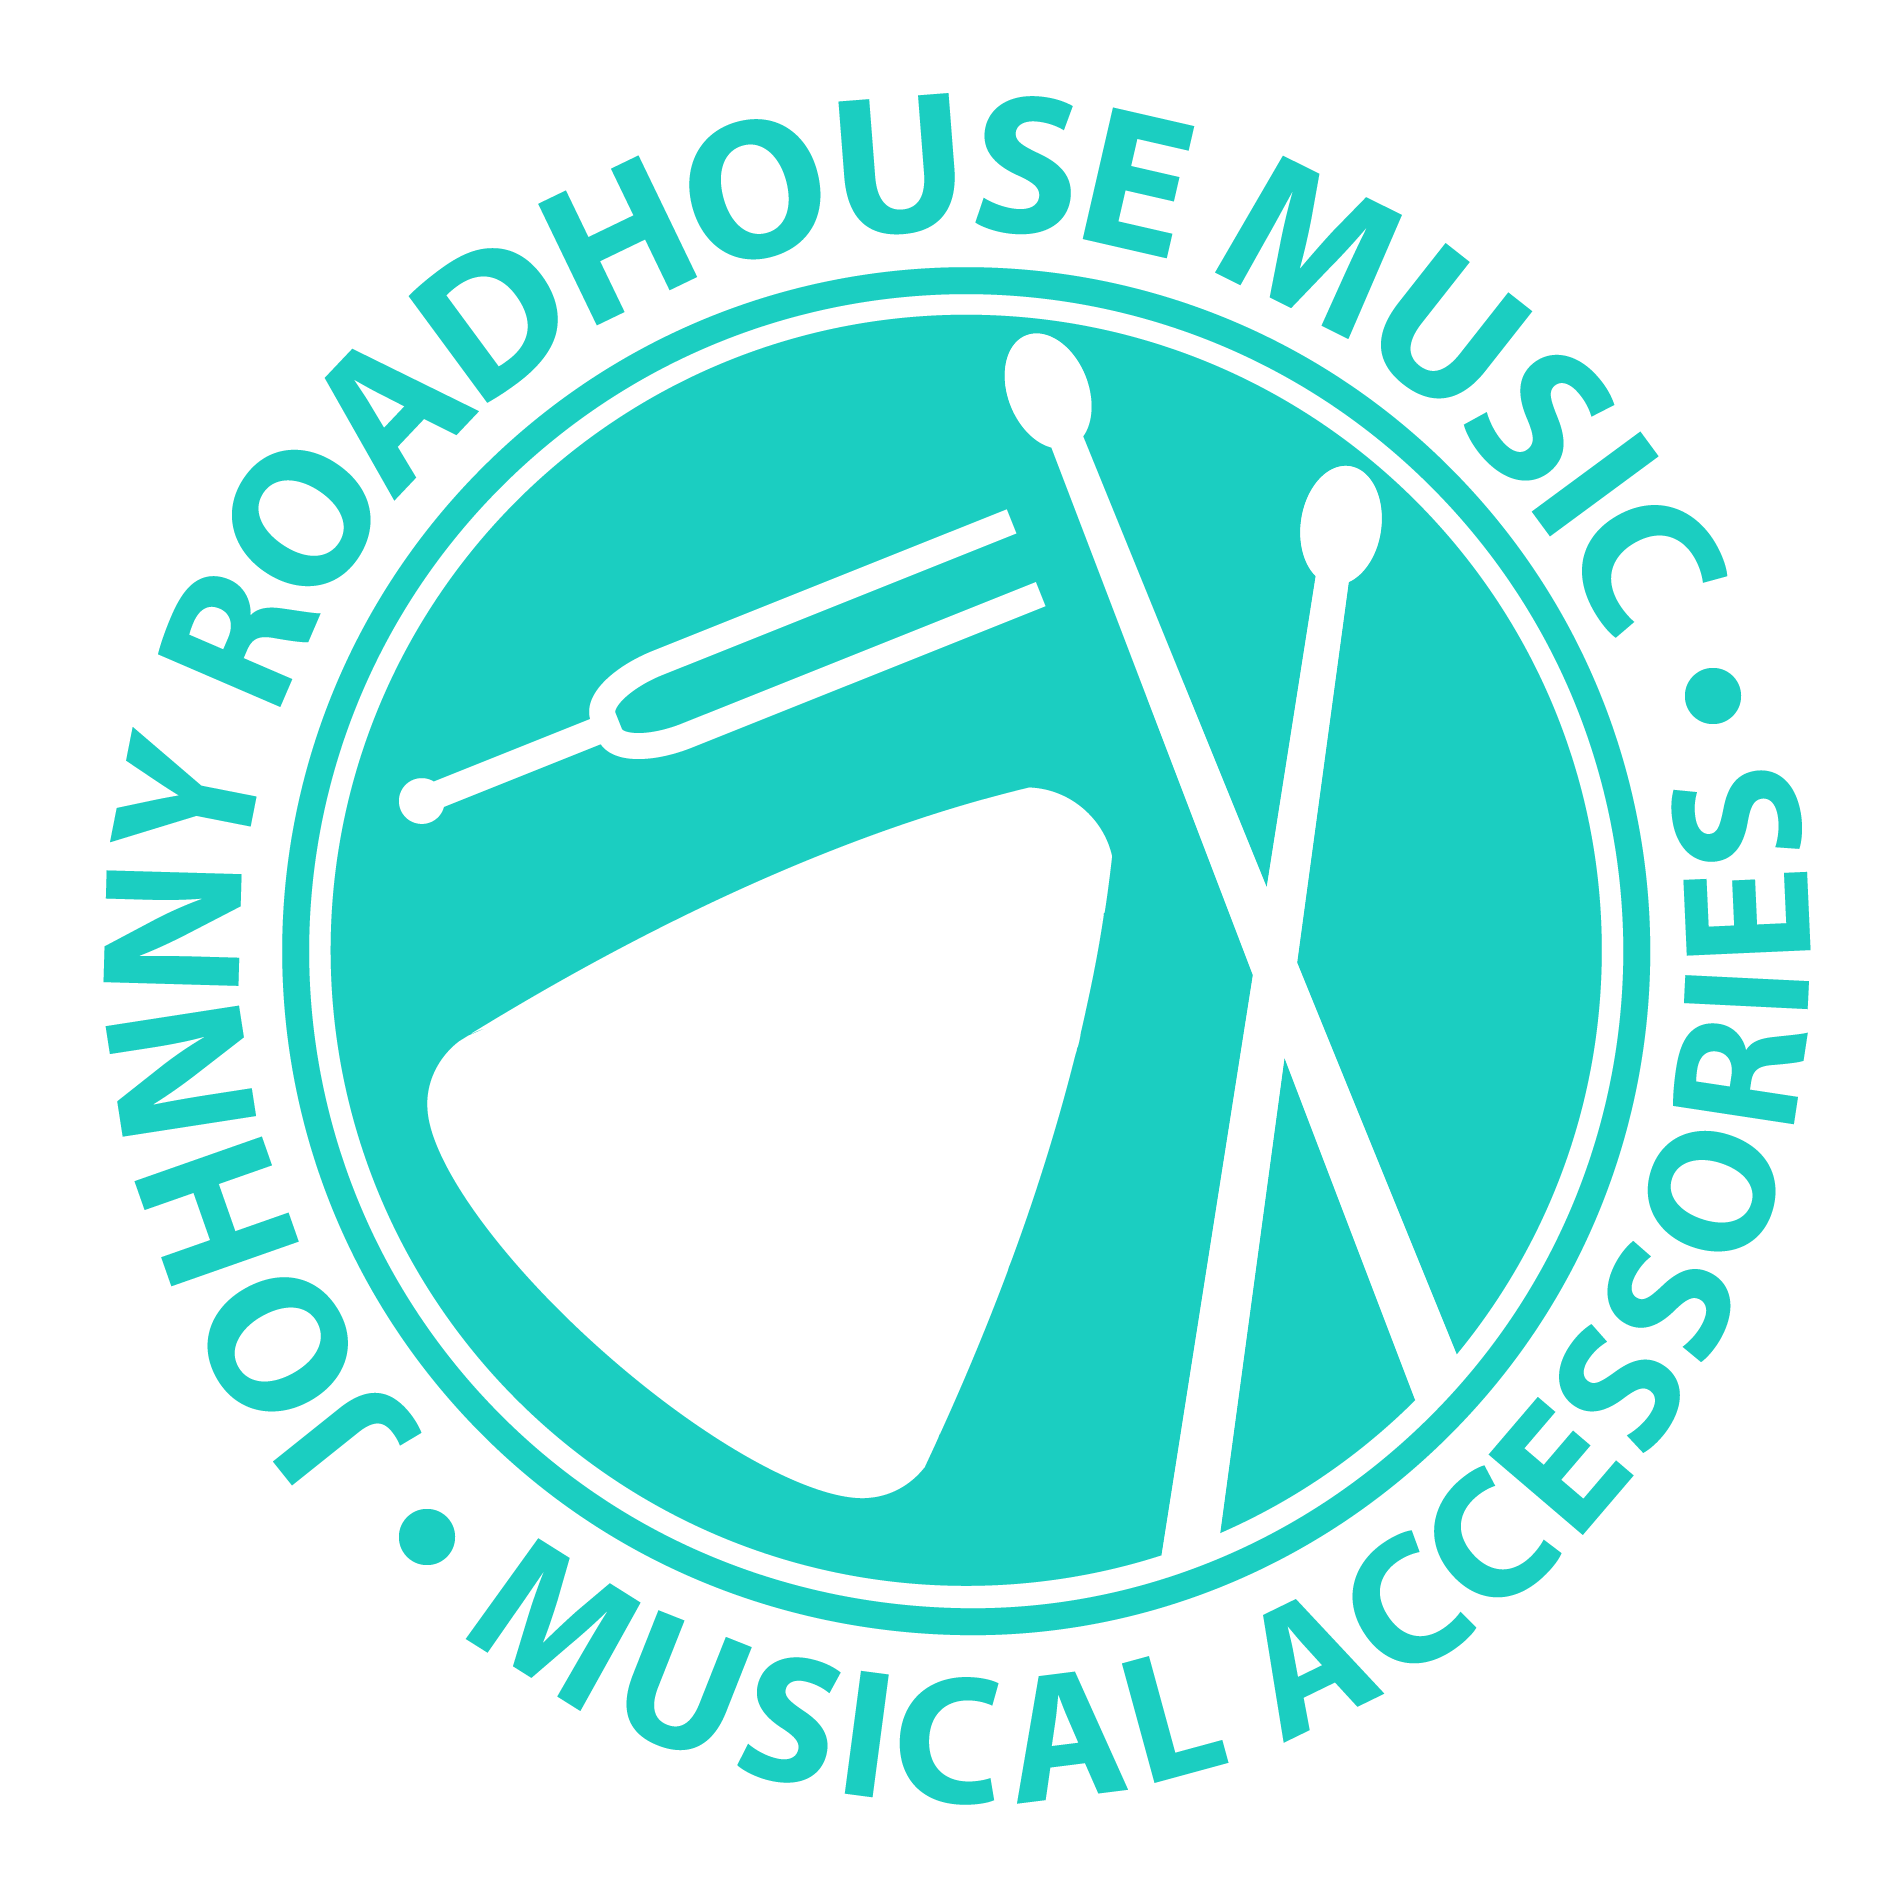 Johnny Roadhouse Music - Musical Accessories Department